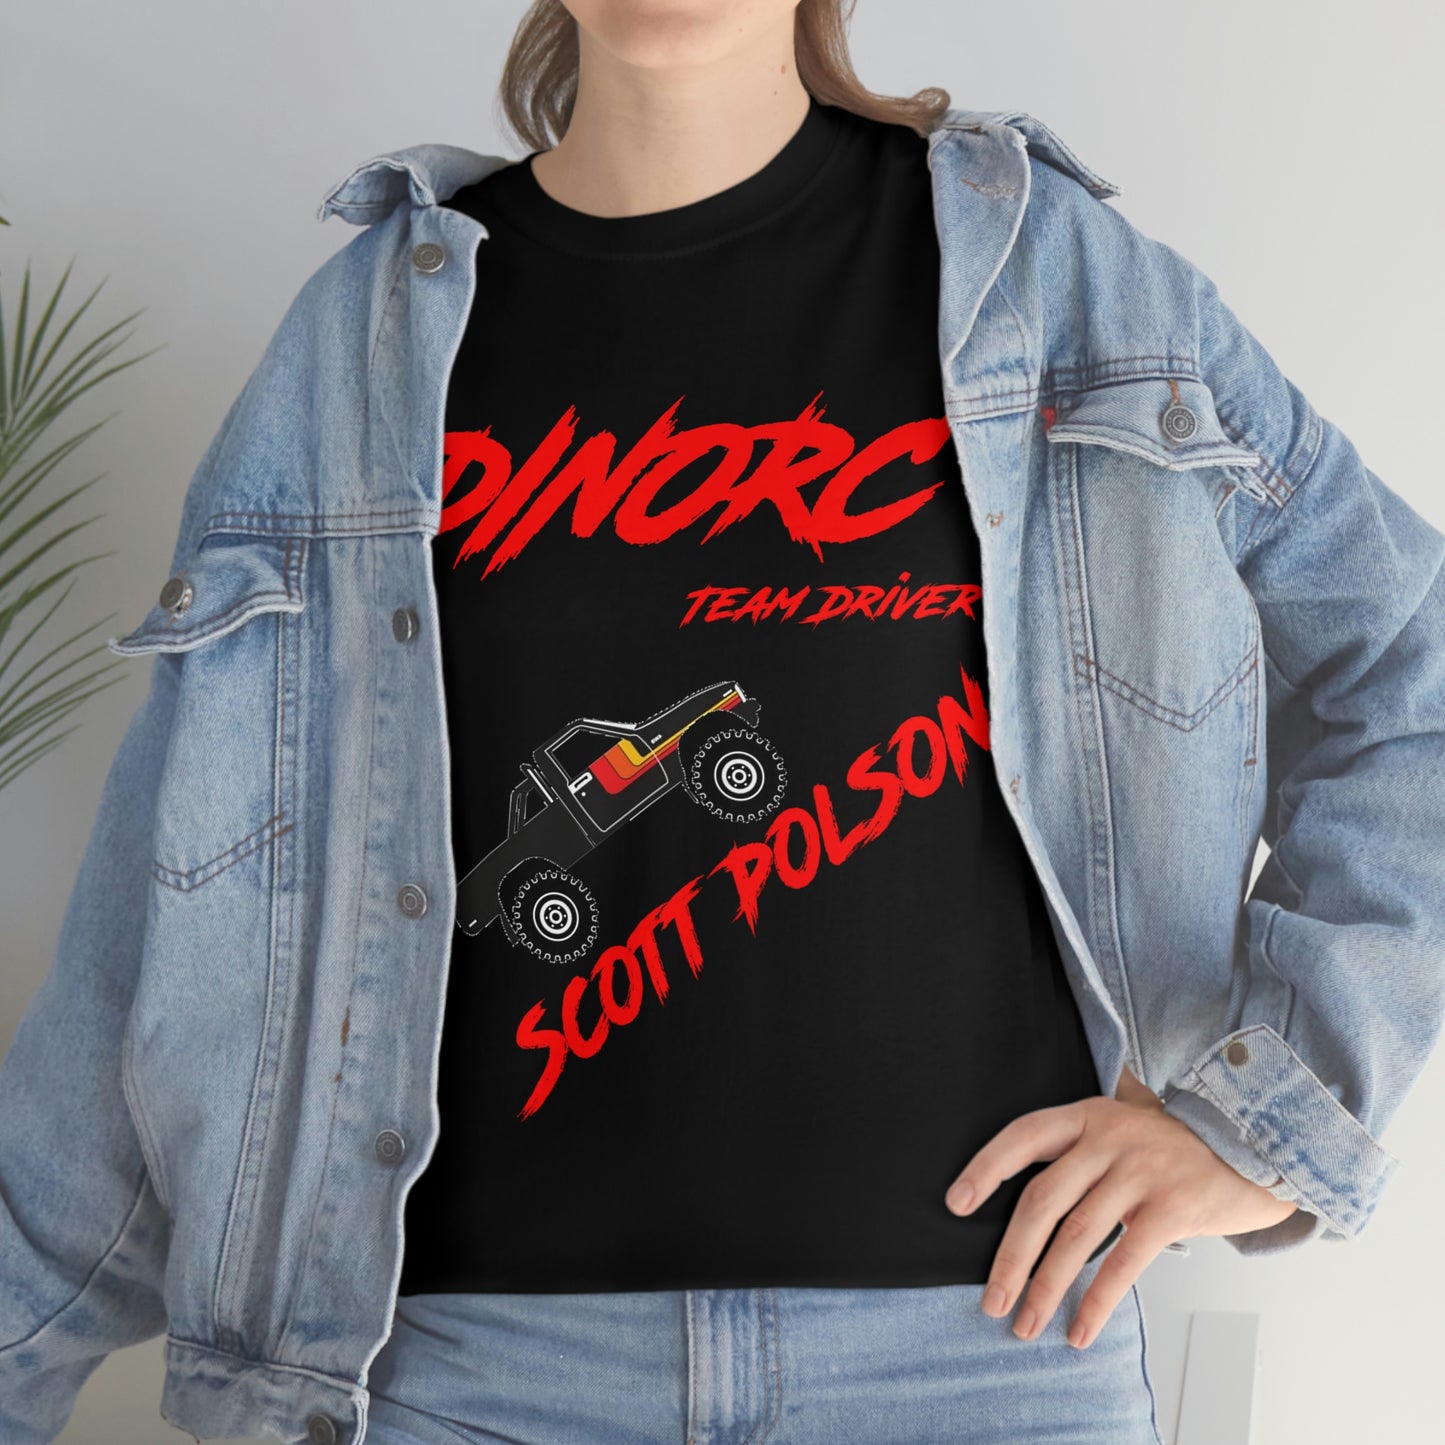 Team Driver Scott Polson truck logo Front and Back DinoRc Logo T-Shirt S-5x 5 colors